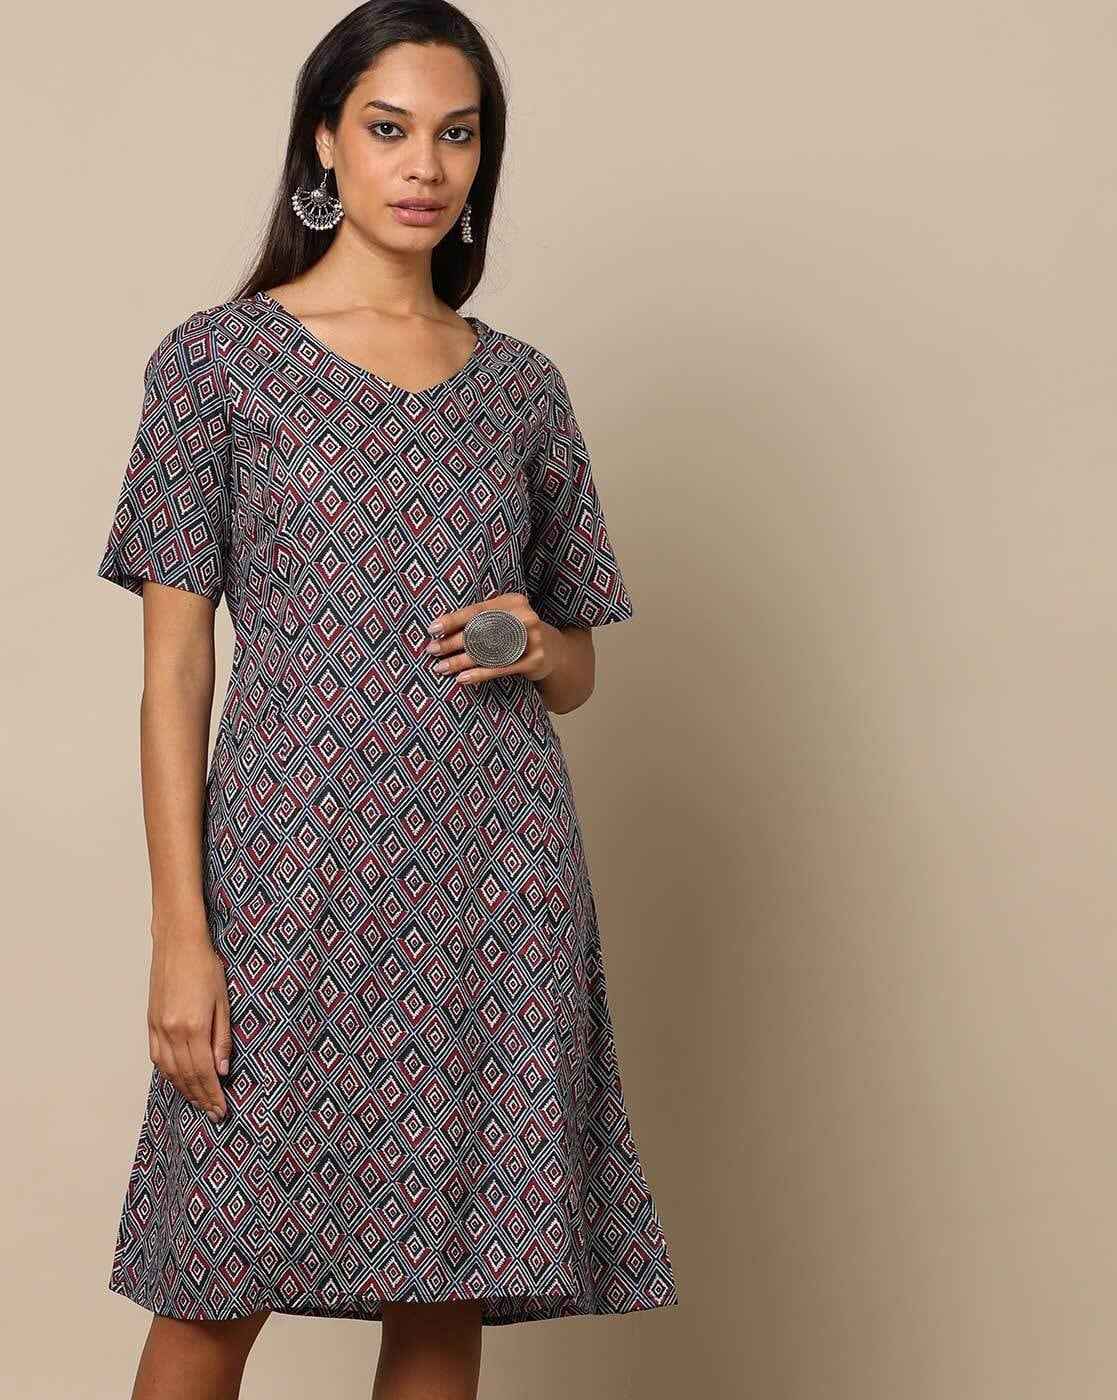 Mango Women Olive Green Printed A Line Dress 7908925.htm - Buy Mango Women  Olive Green Printed A Line Dress 7908925.htm online in India